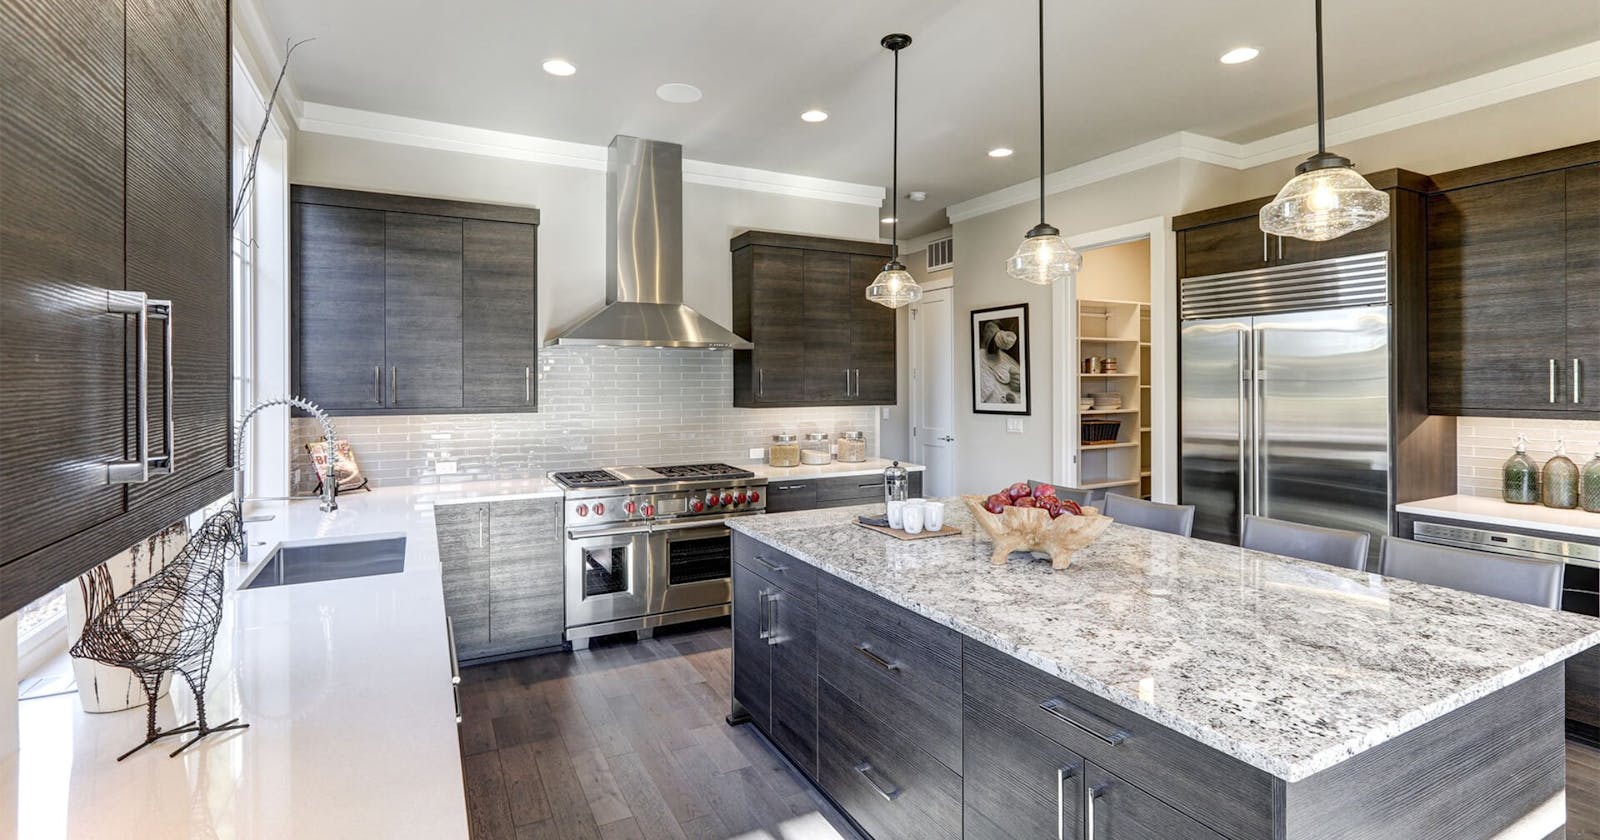 How to Select the Best Kitchen Remodel Contractors in Orland Park, IL?